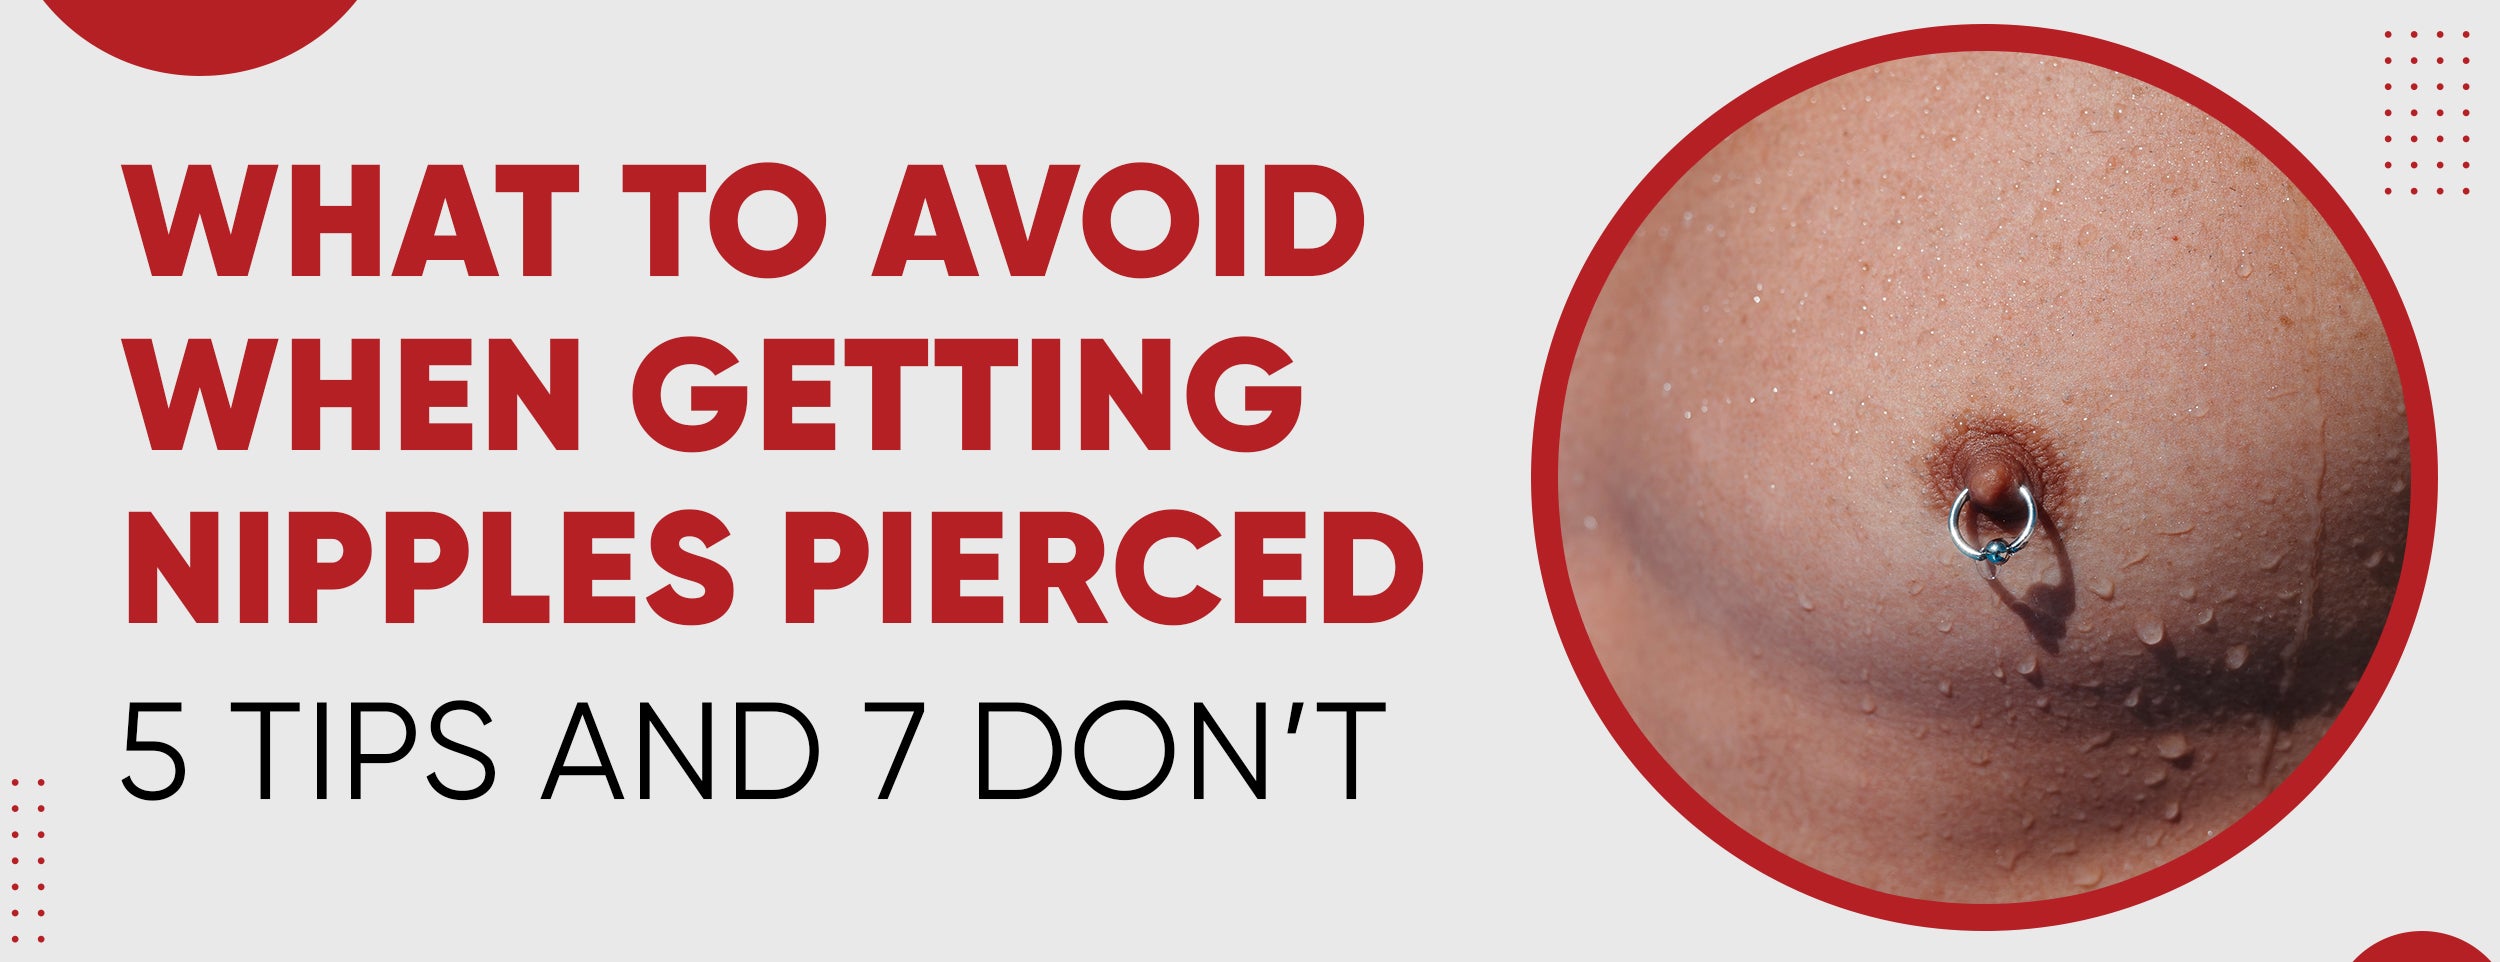 What to Avoid When Getting Nipples Pierced: 5 Tips – Dr. Numb®